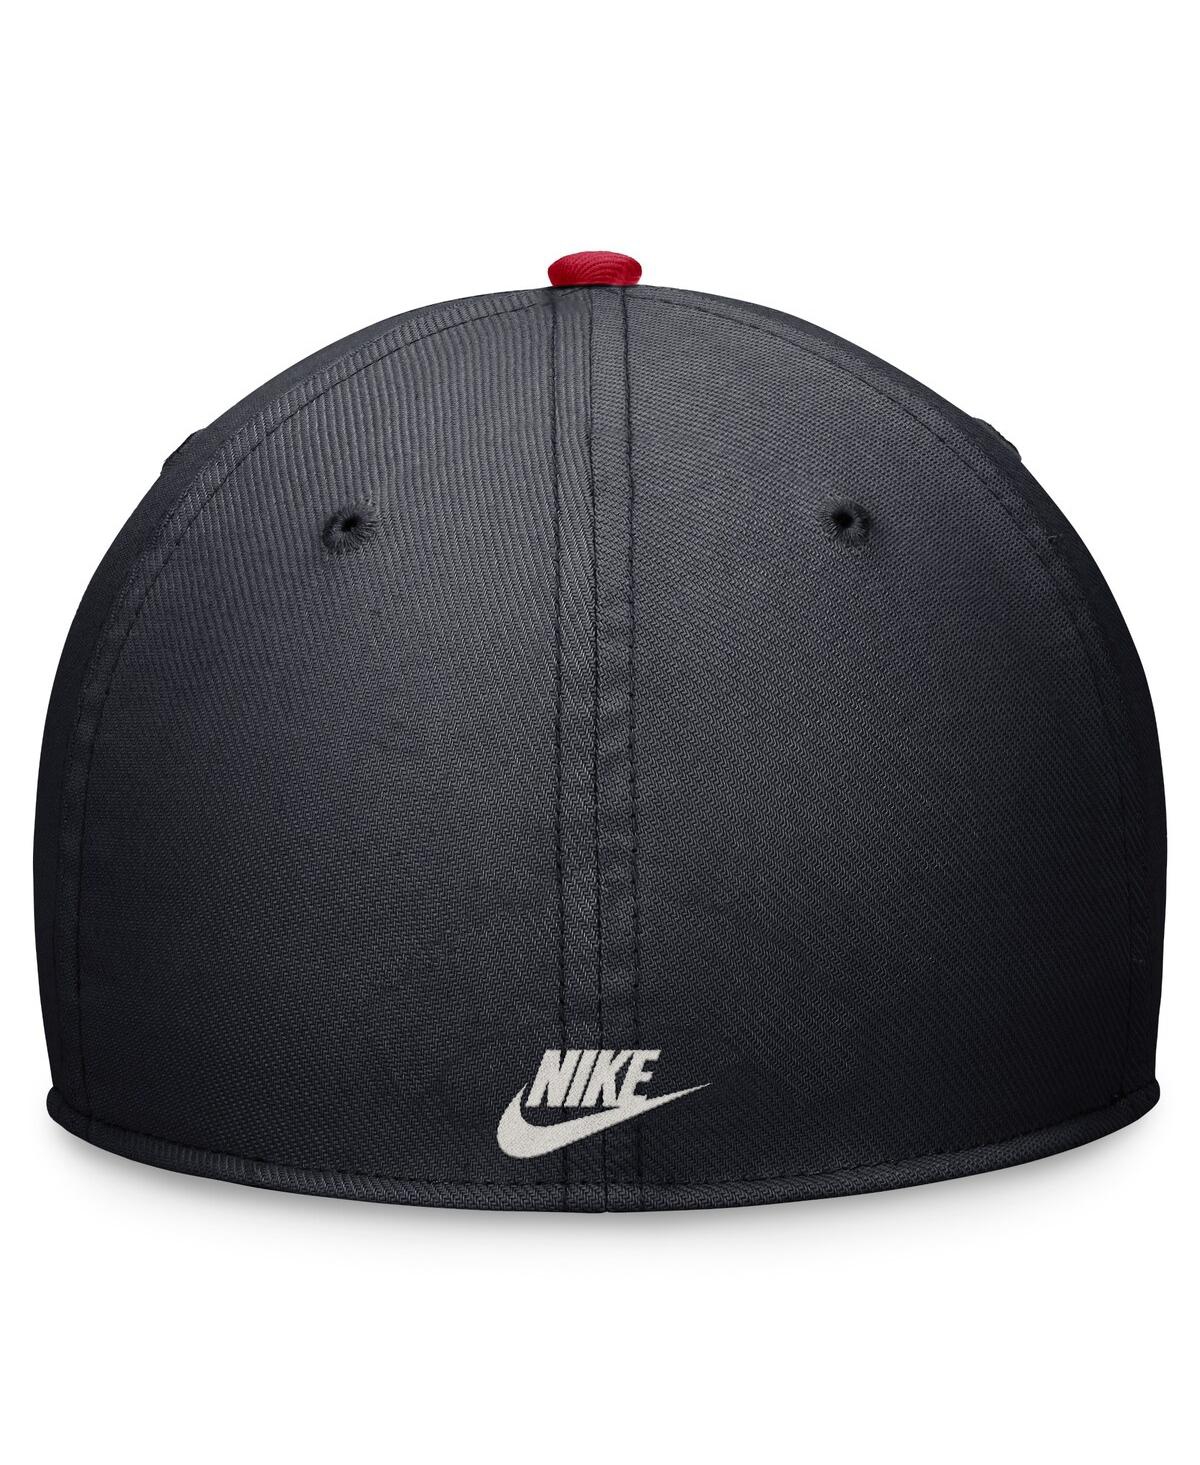 Shop Nike Men's  Navy, Red Boston Red Sox Cooperstown Collection Rewind Swooshflex Performance Hat In Navy,red